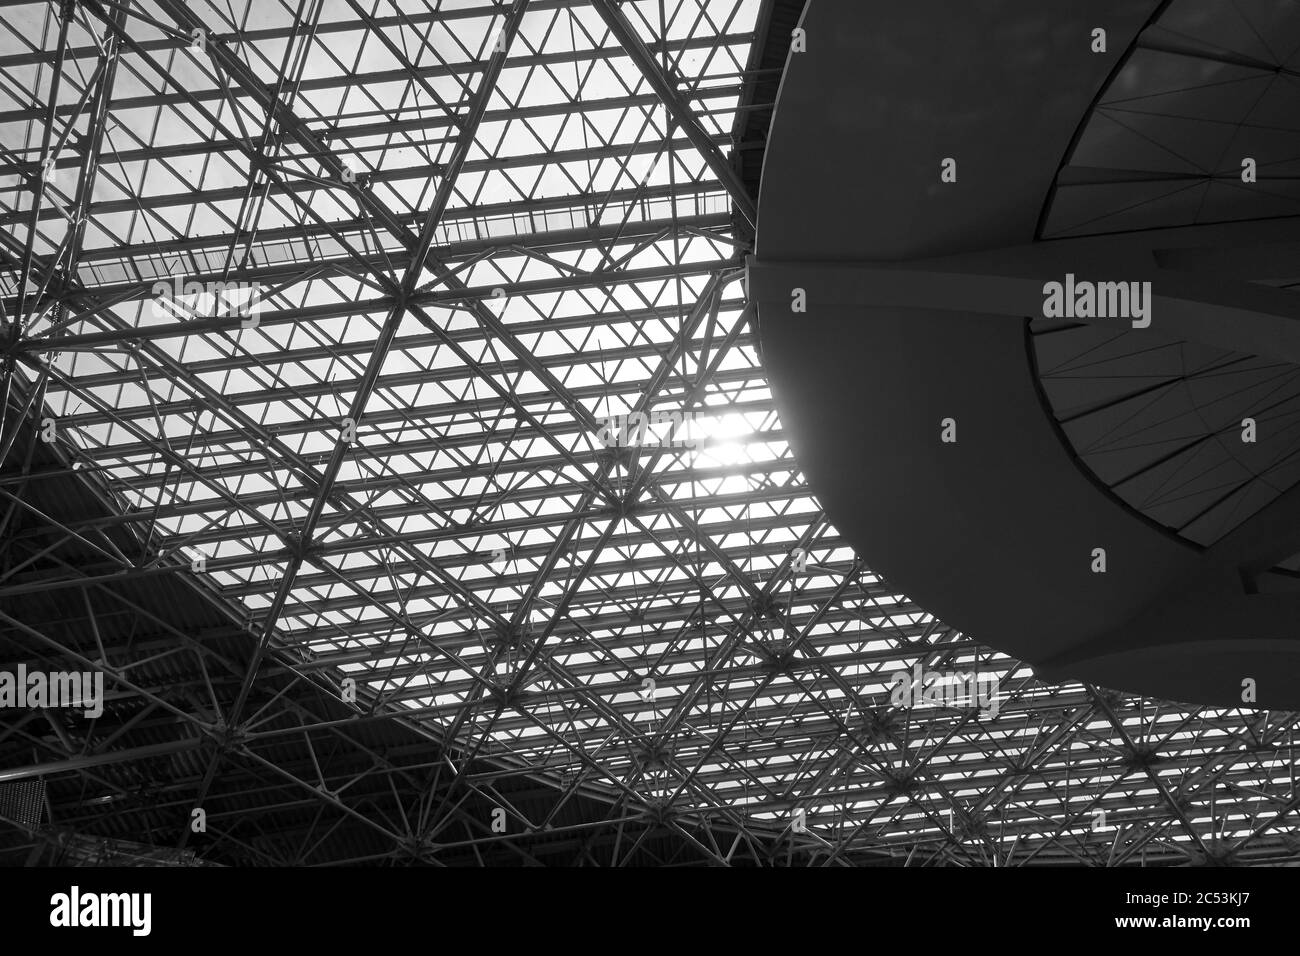 Skylight window - huge industrial construct with glass ceiling. Black and white architectural photography Stock Photo